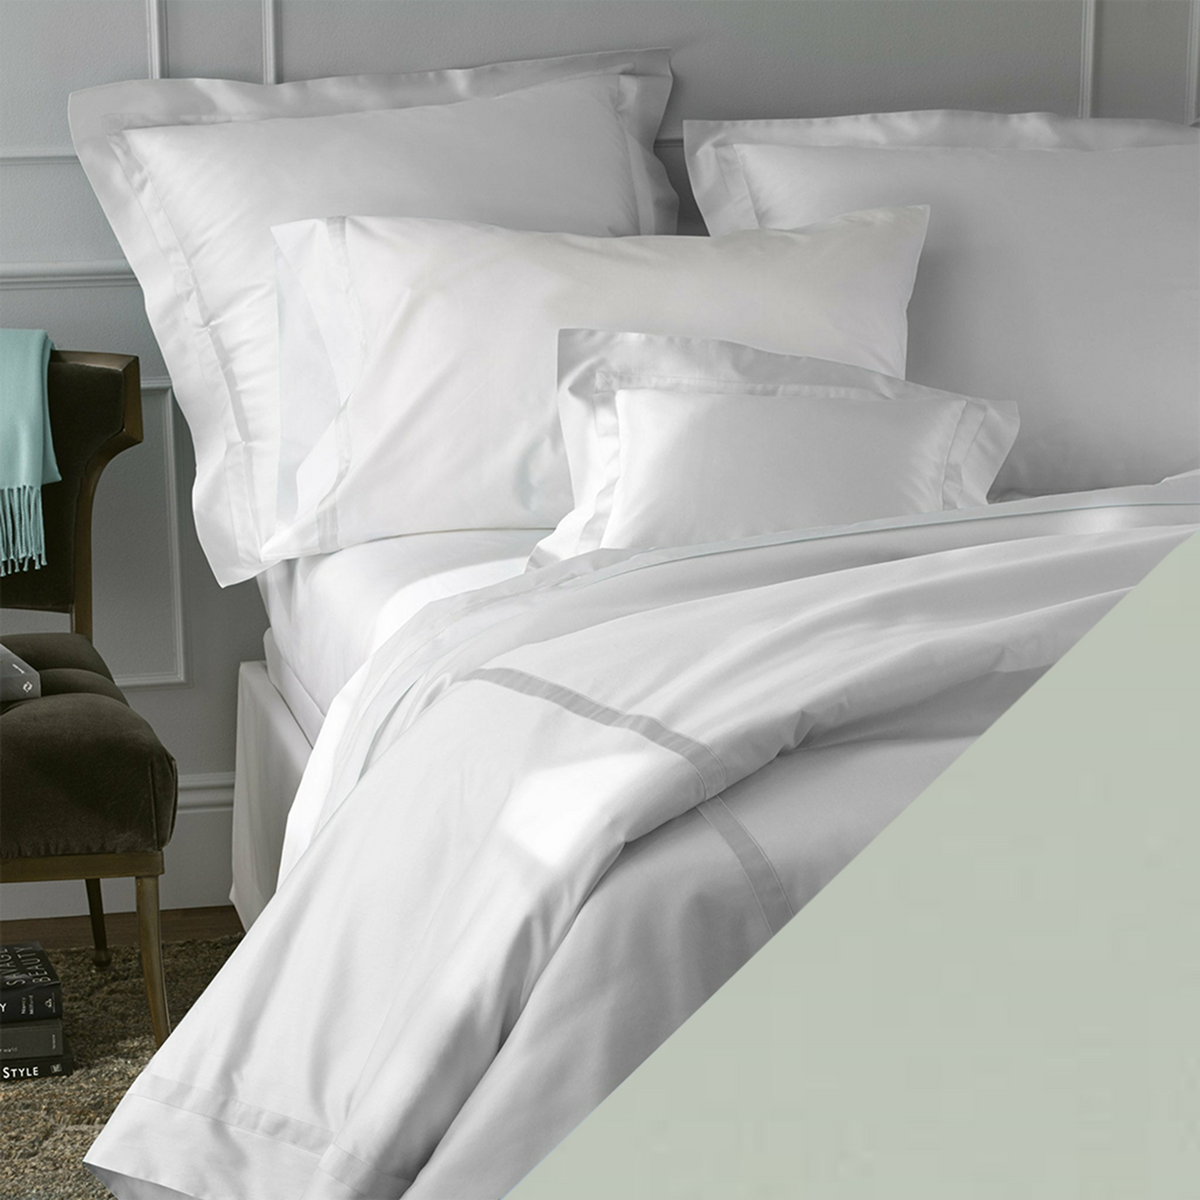 Matouk Nocturne Bedding Collection with Swatch in Celadon Color